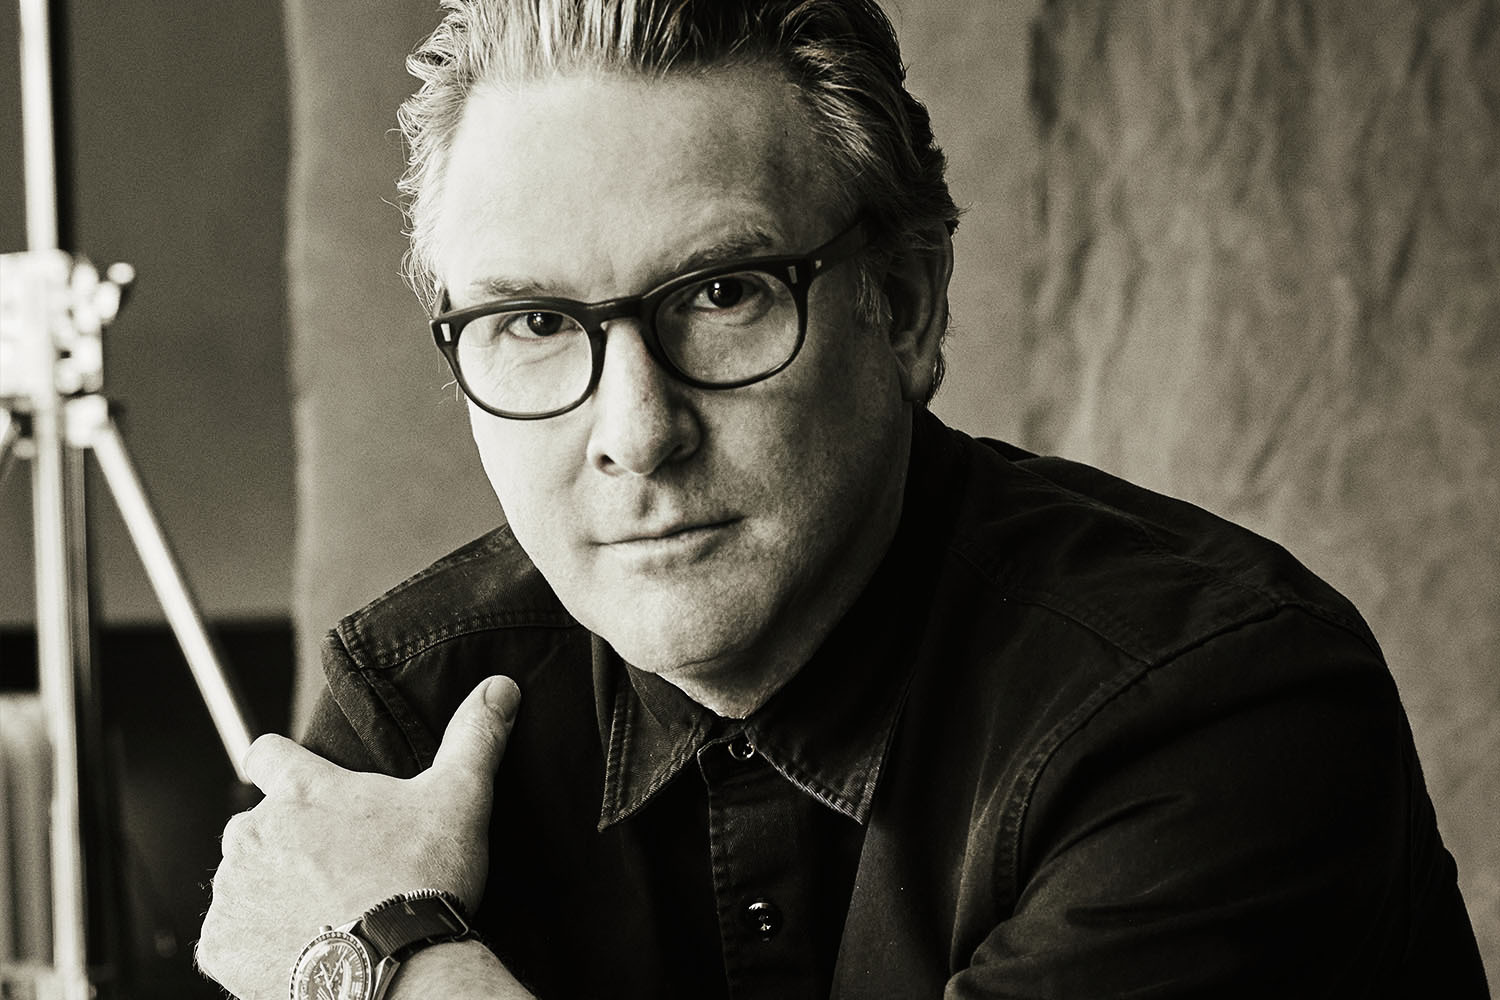 A portrait of menswear designer Todd Snyder, wearing glasses, a watch and a button-up shirt, on the occasion of the 10-year anniversary of his eponymous brand